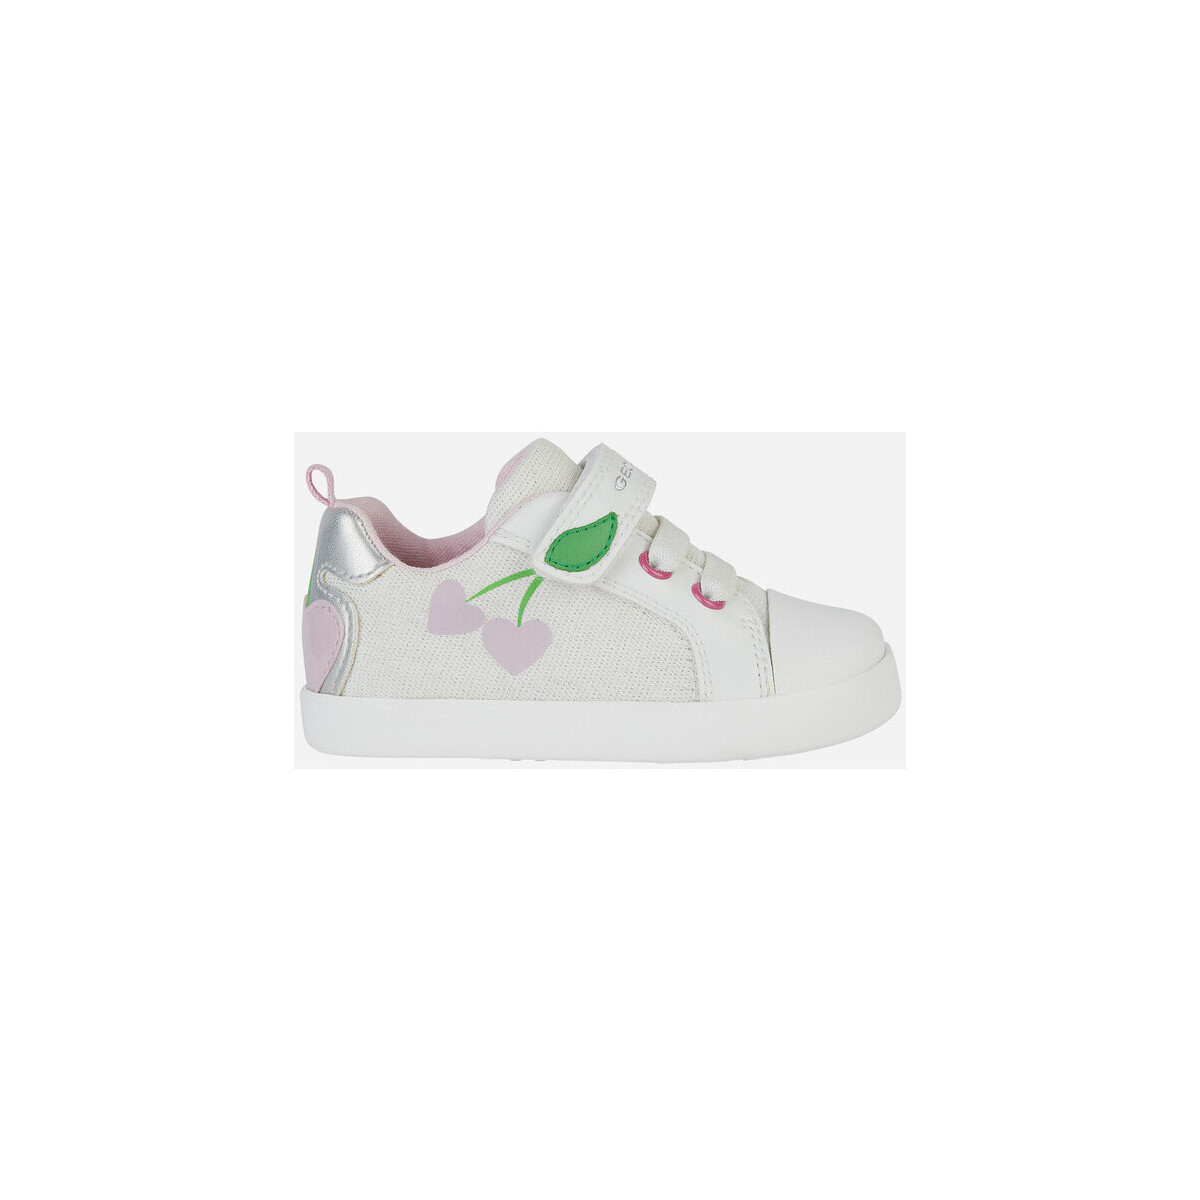 Chaussures Fille Randonnée Geox B KILWI GIRL Rose